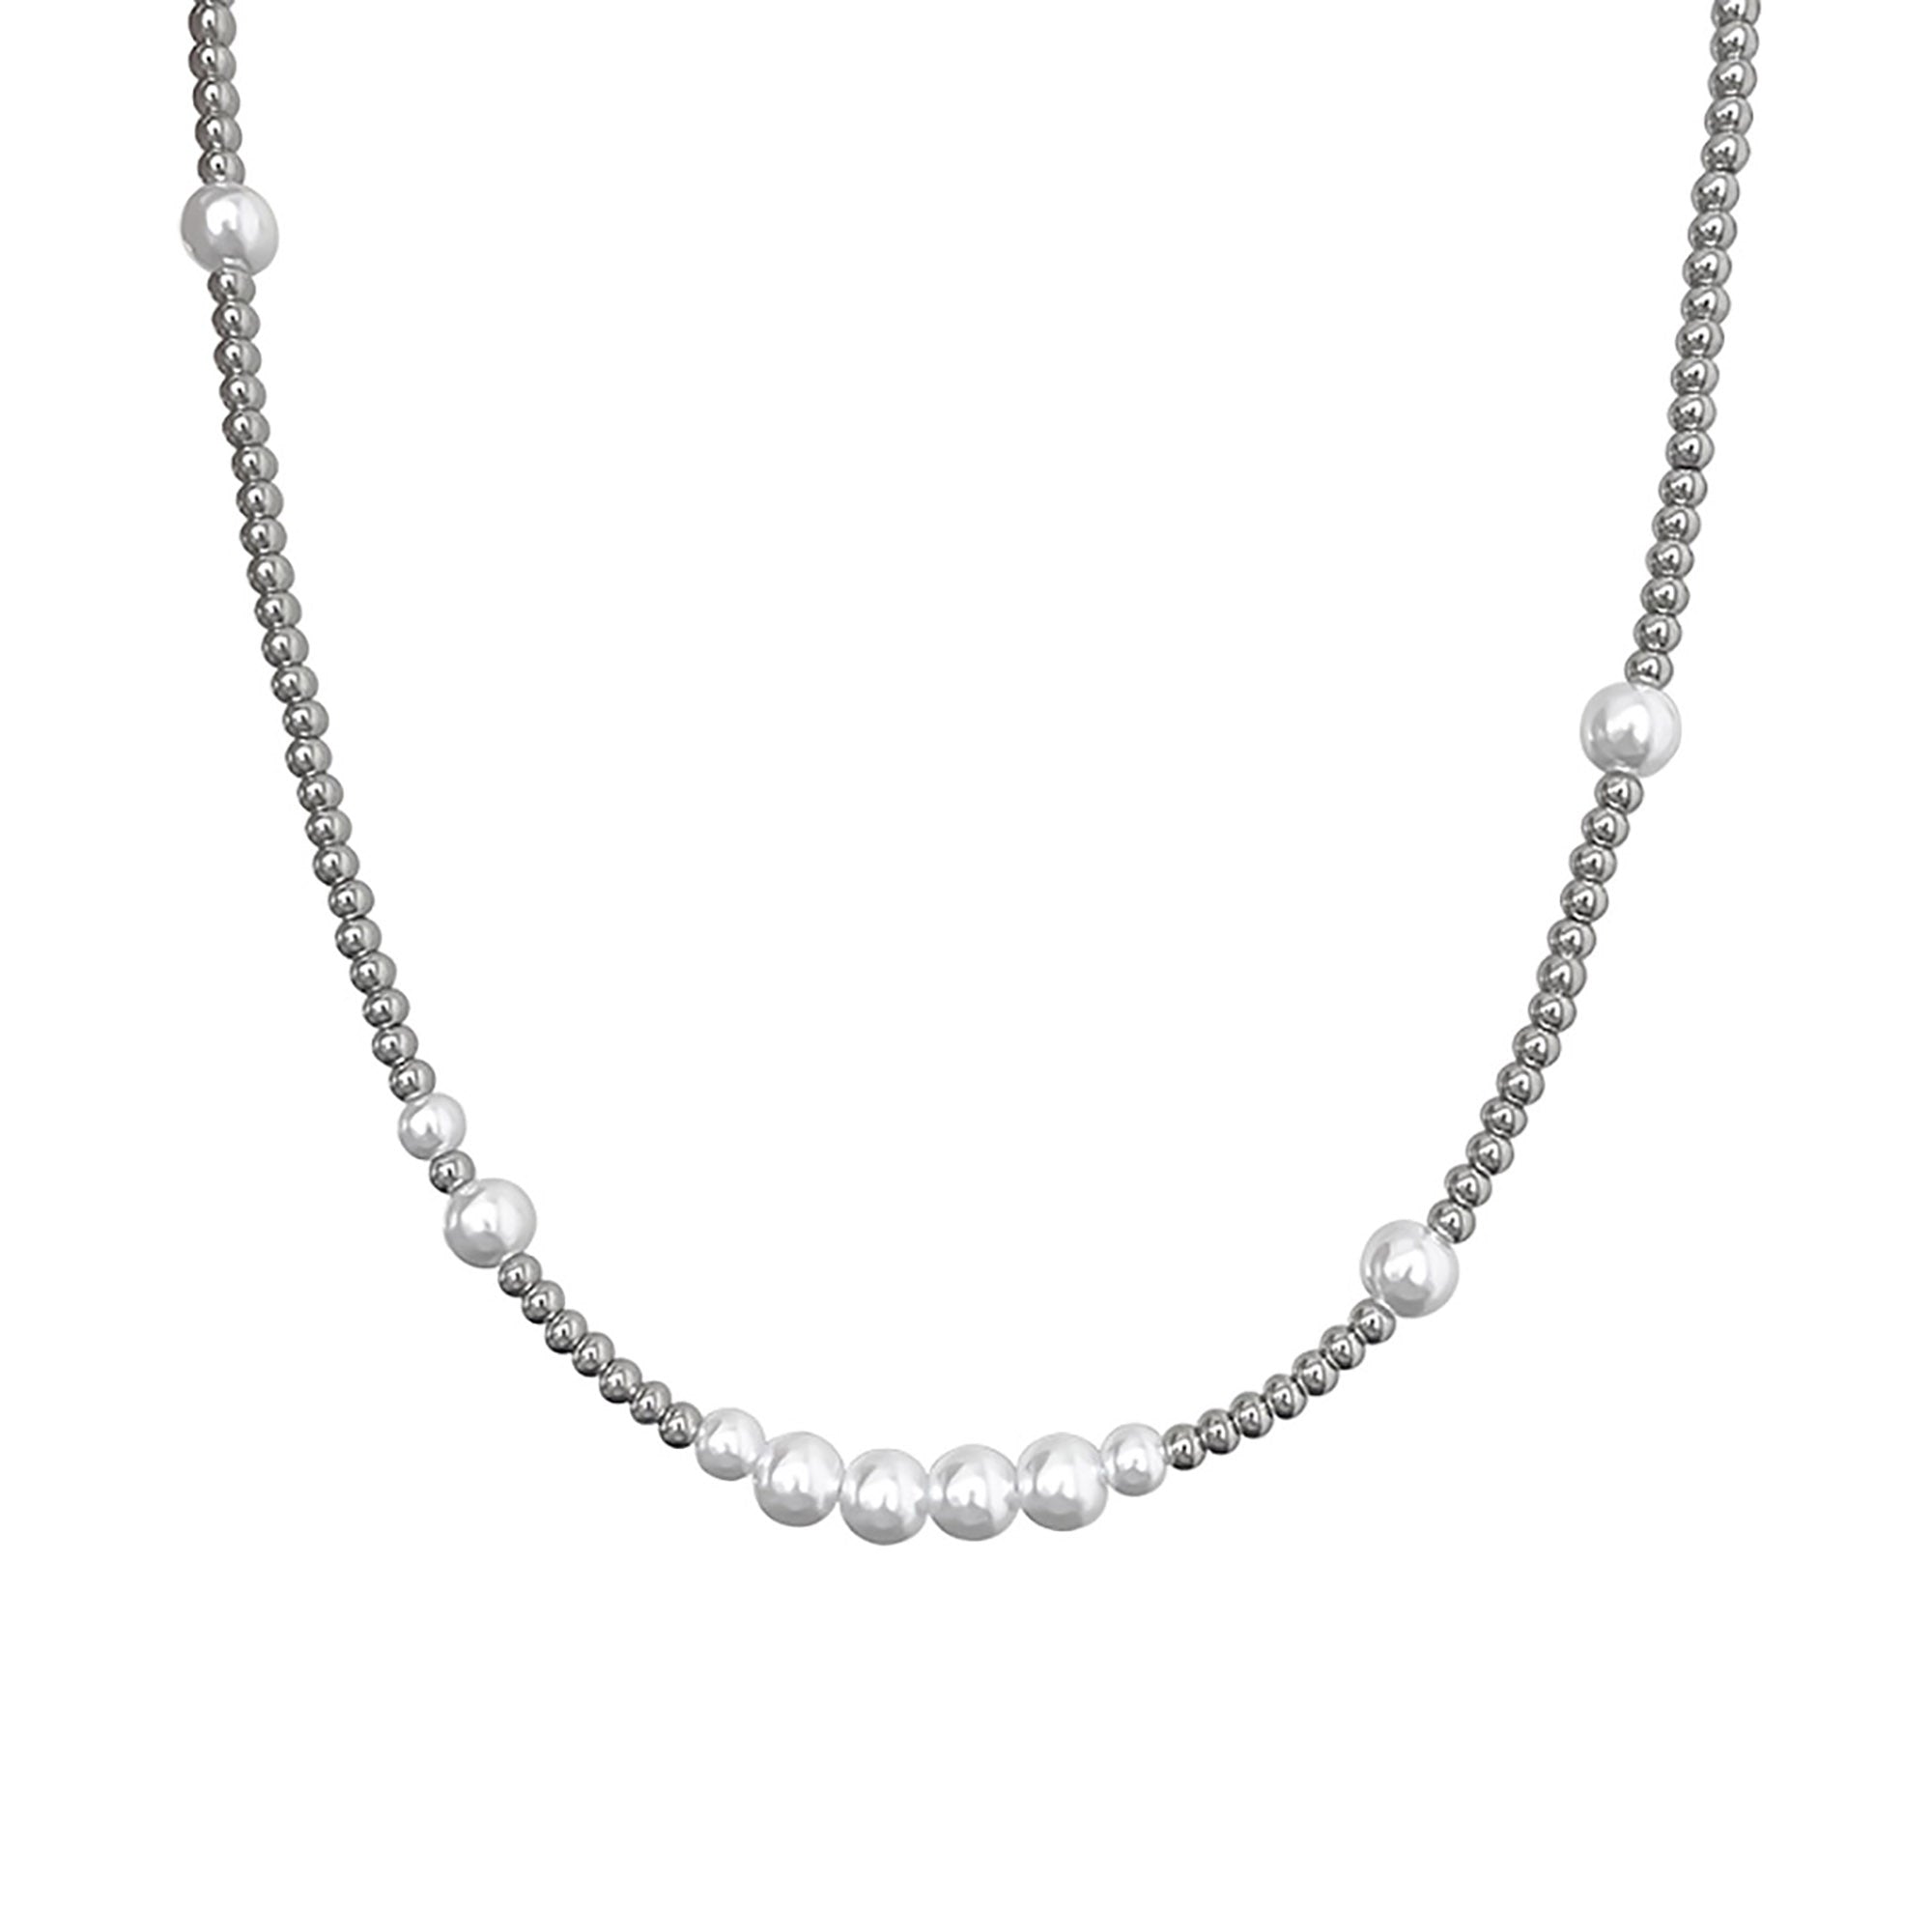 Stainless Steel Ball w/ Pearl Necklace Valentine Day Gift KOL / Youtuber / Celebrity / Fashion Icon styling